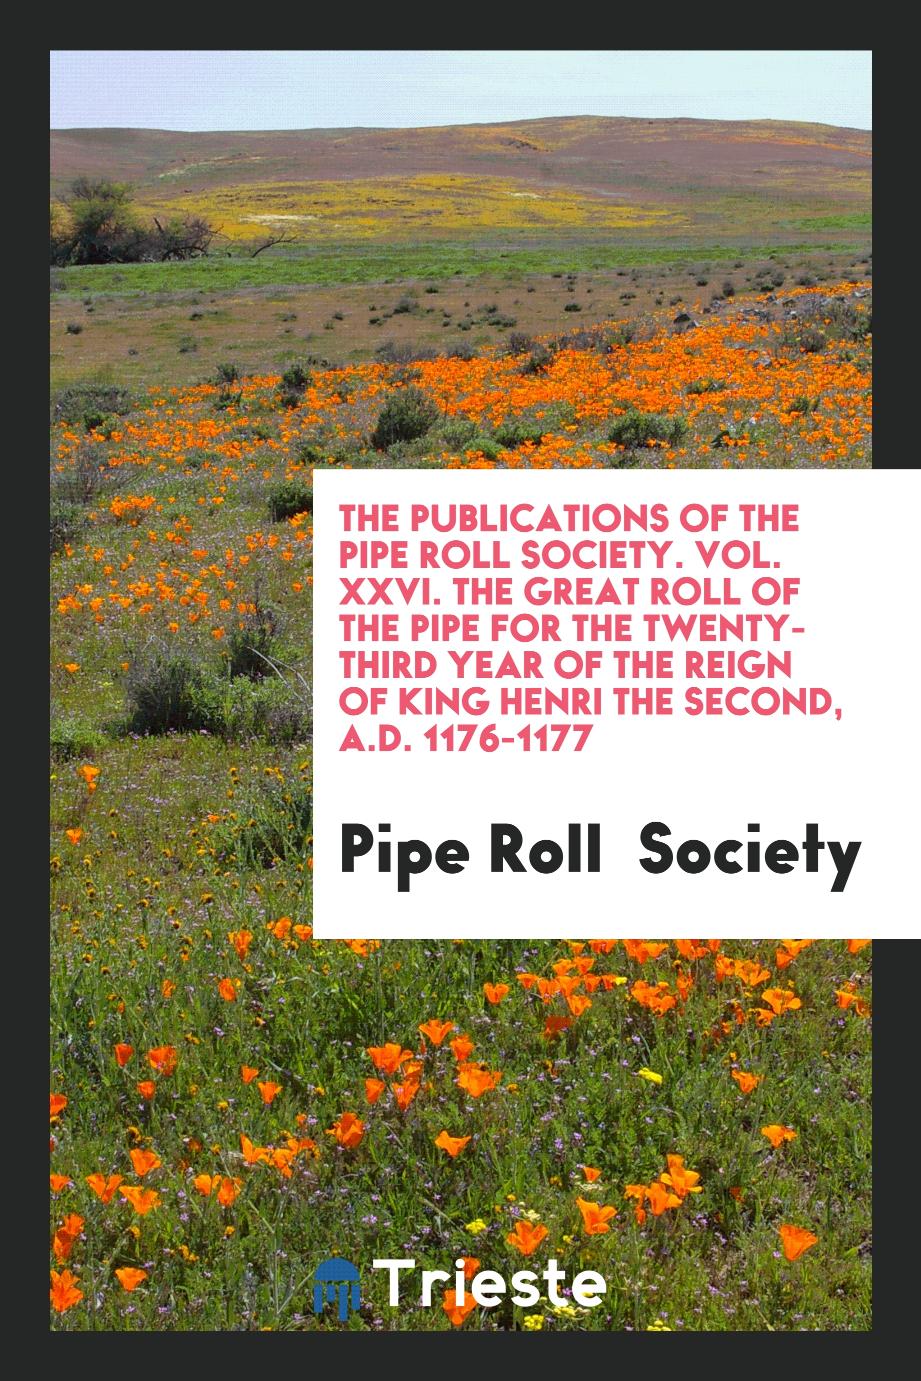 The Publications of the Pipe Roll Society. Vol. XXVI. The Great Roll of the Pipe for the Twenty-Third Year of the Reign of King Henri the Second, A.D. 1176-1177